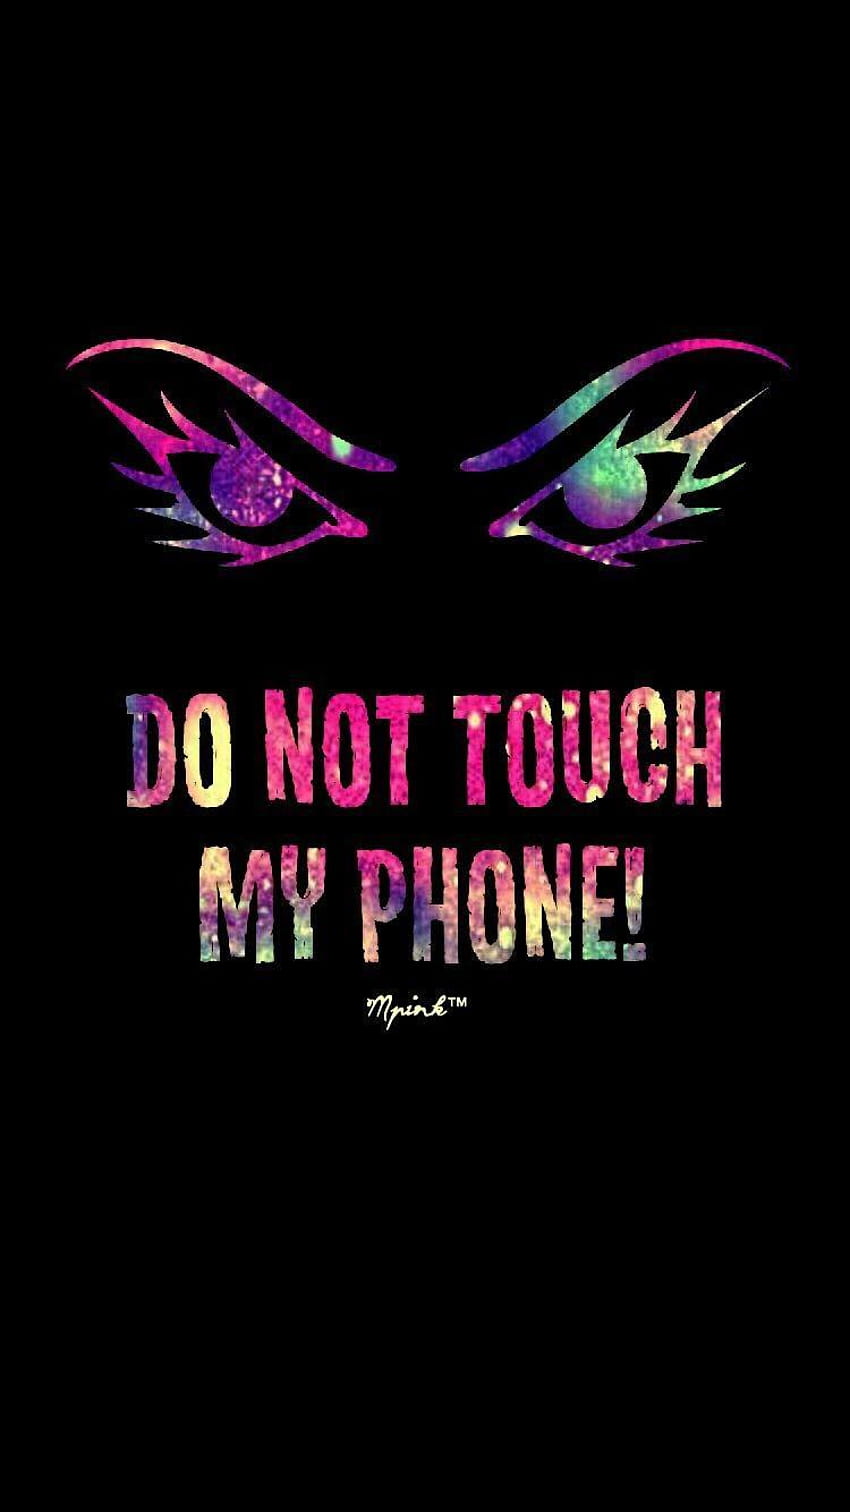 DONT TOUCH MY PHONE android apple black dont ios my phone samsung  touch HD phone wallpaper  Peakpx